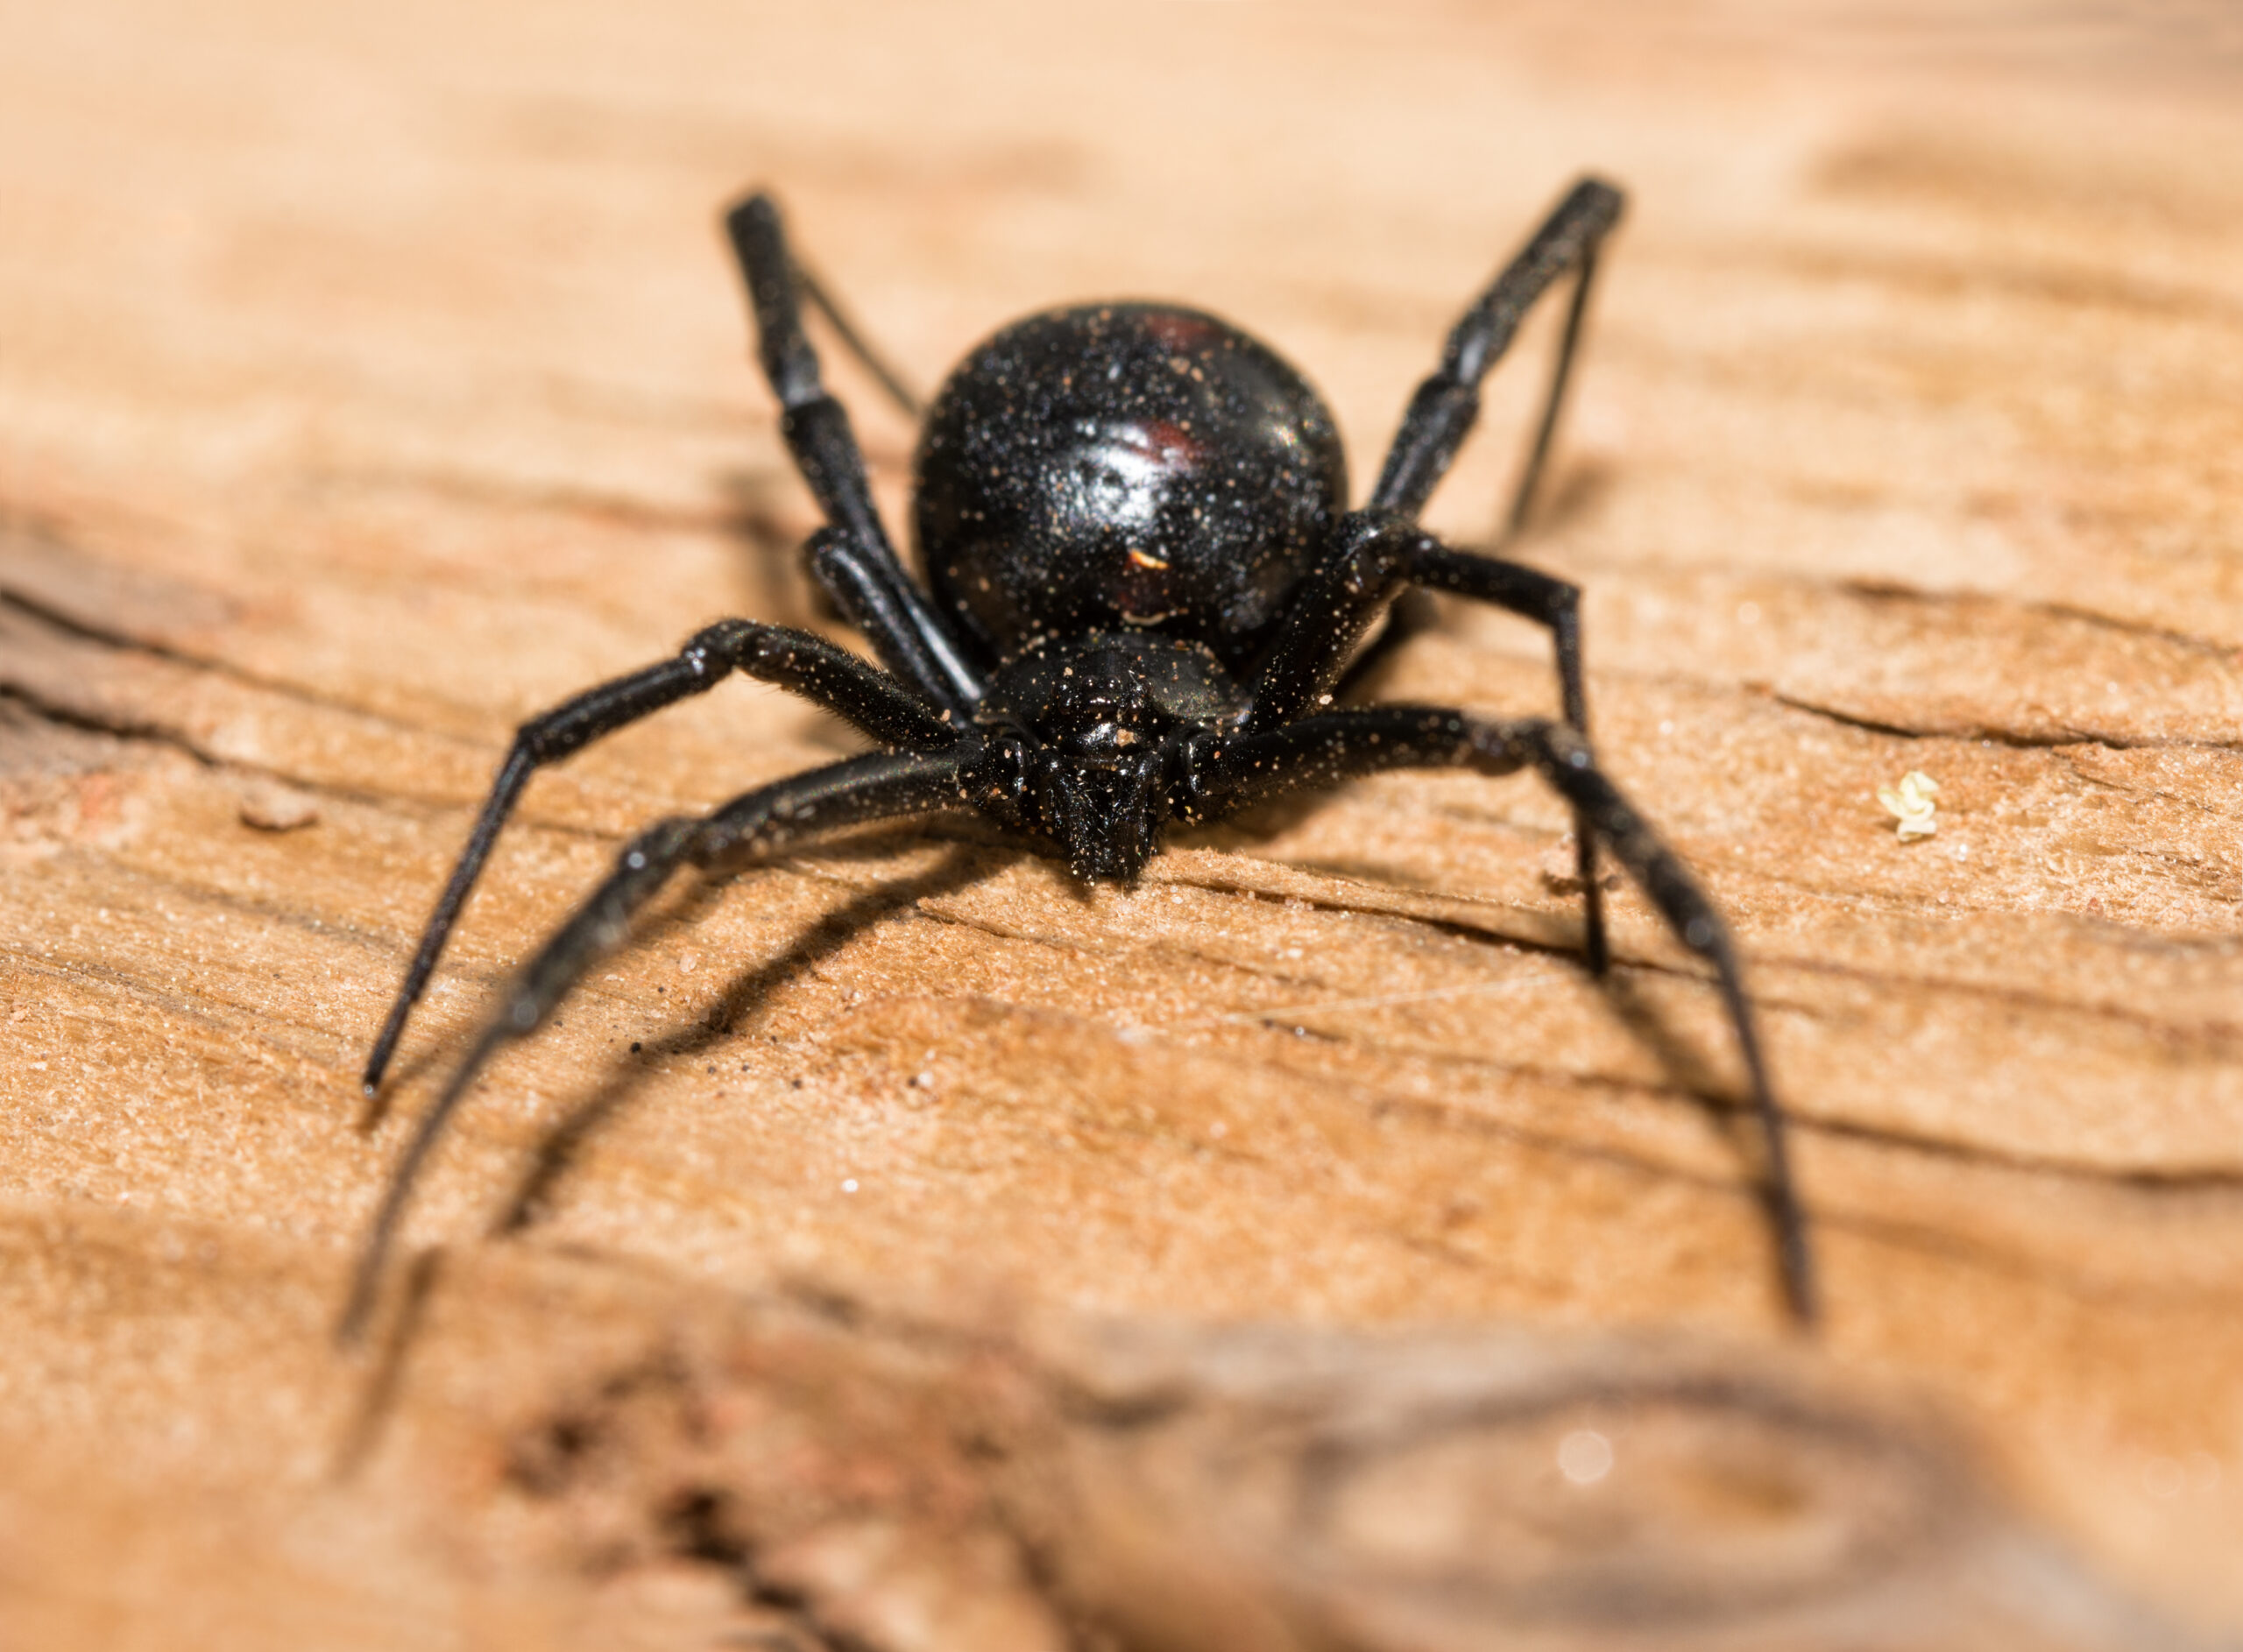 Black Widow spider outdoors on a piece of wood, front view